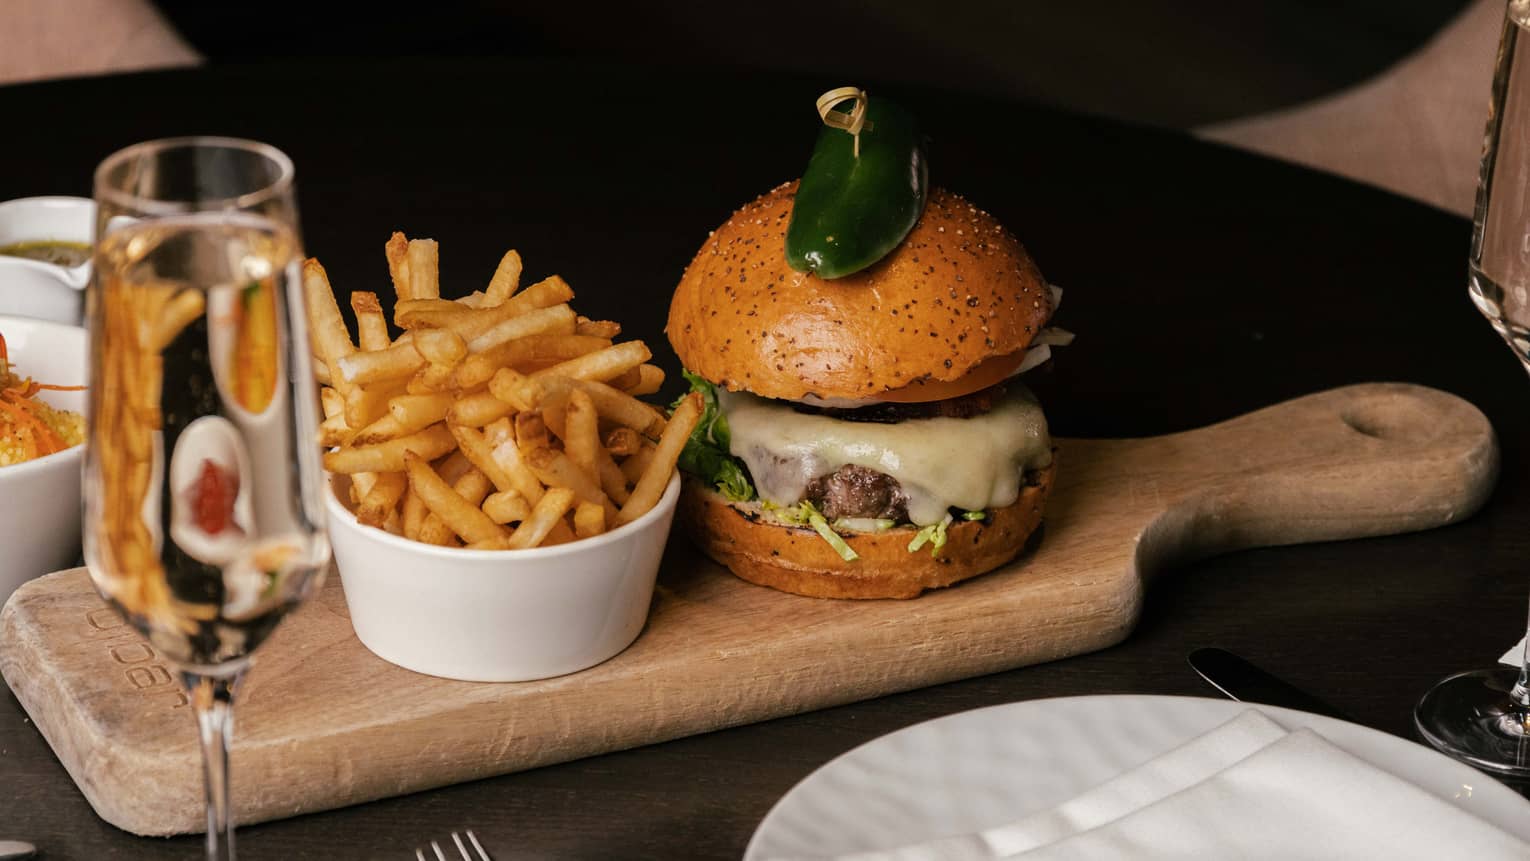 Craft burger and cup of fries on wooden serving board